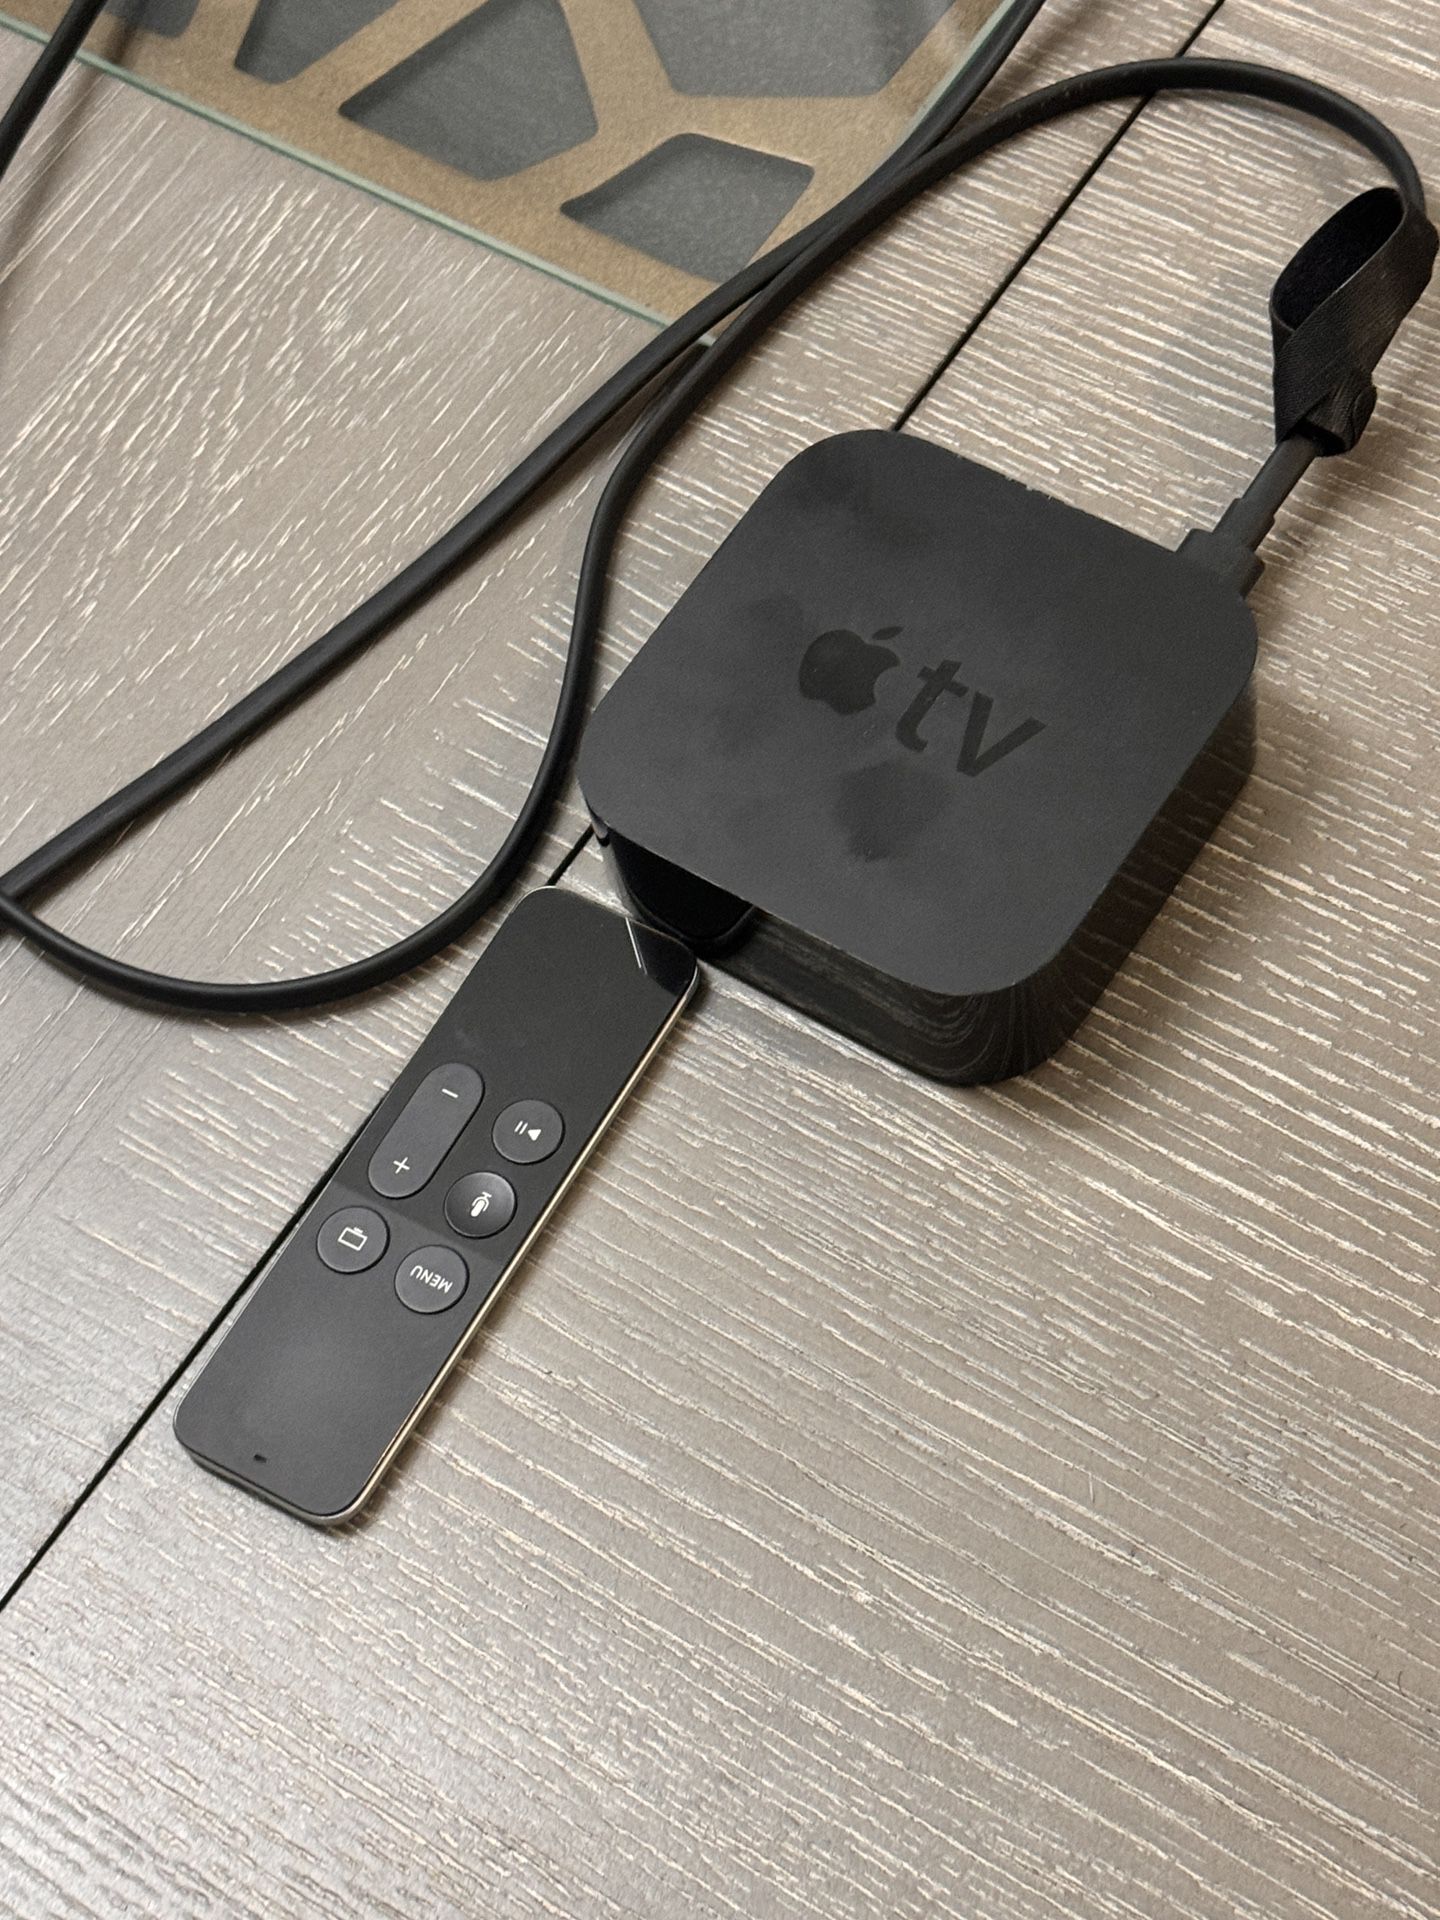 Apple TV 4K with Remote control